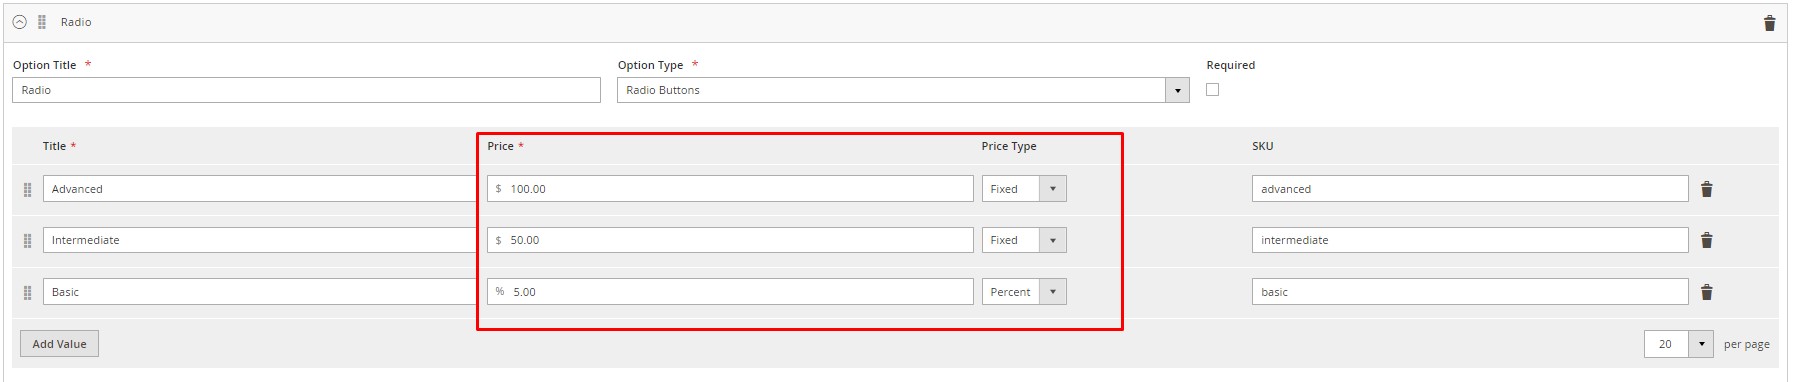 customizable options Magento 2 price rules